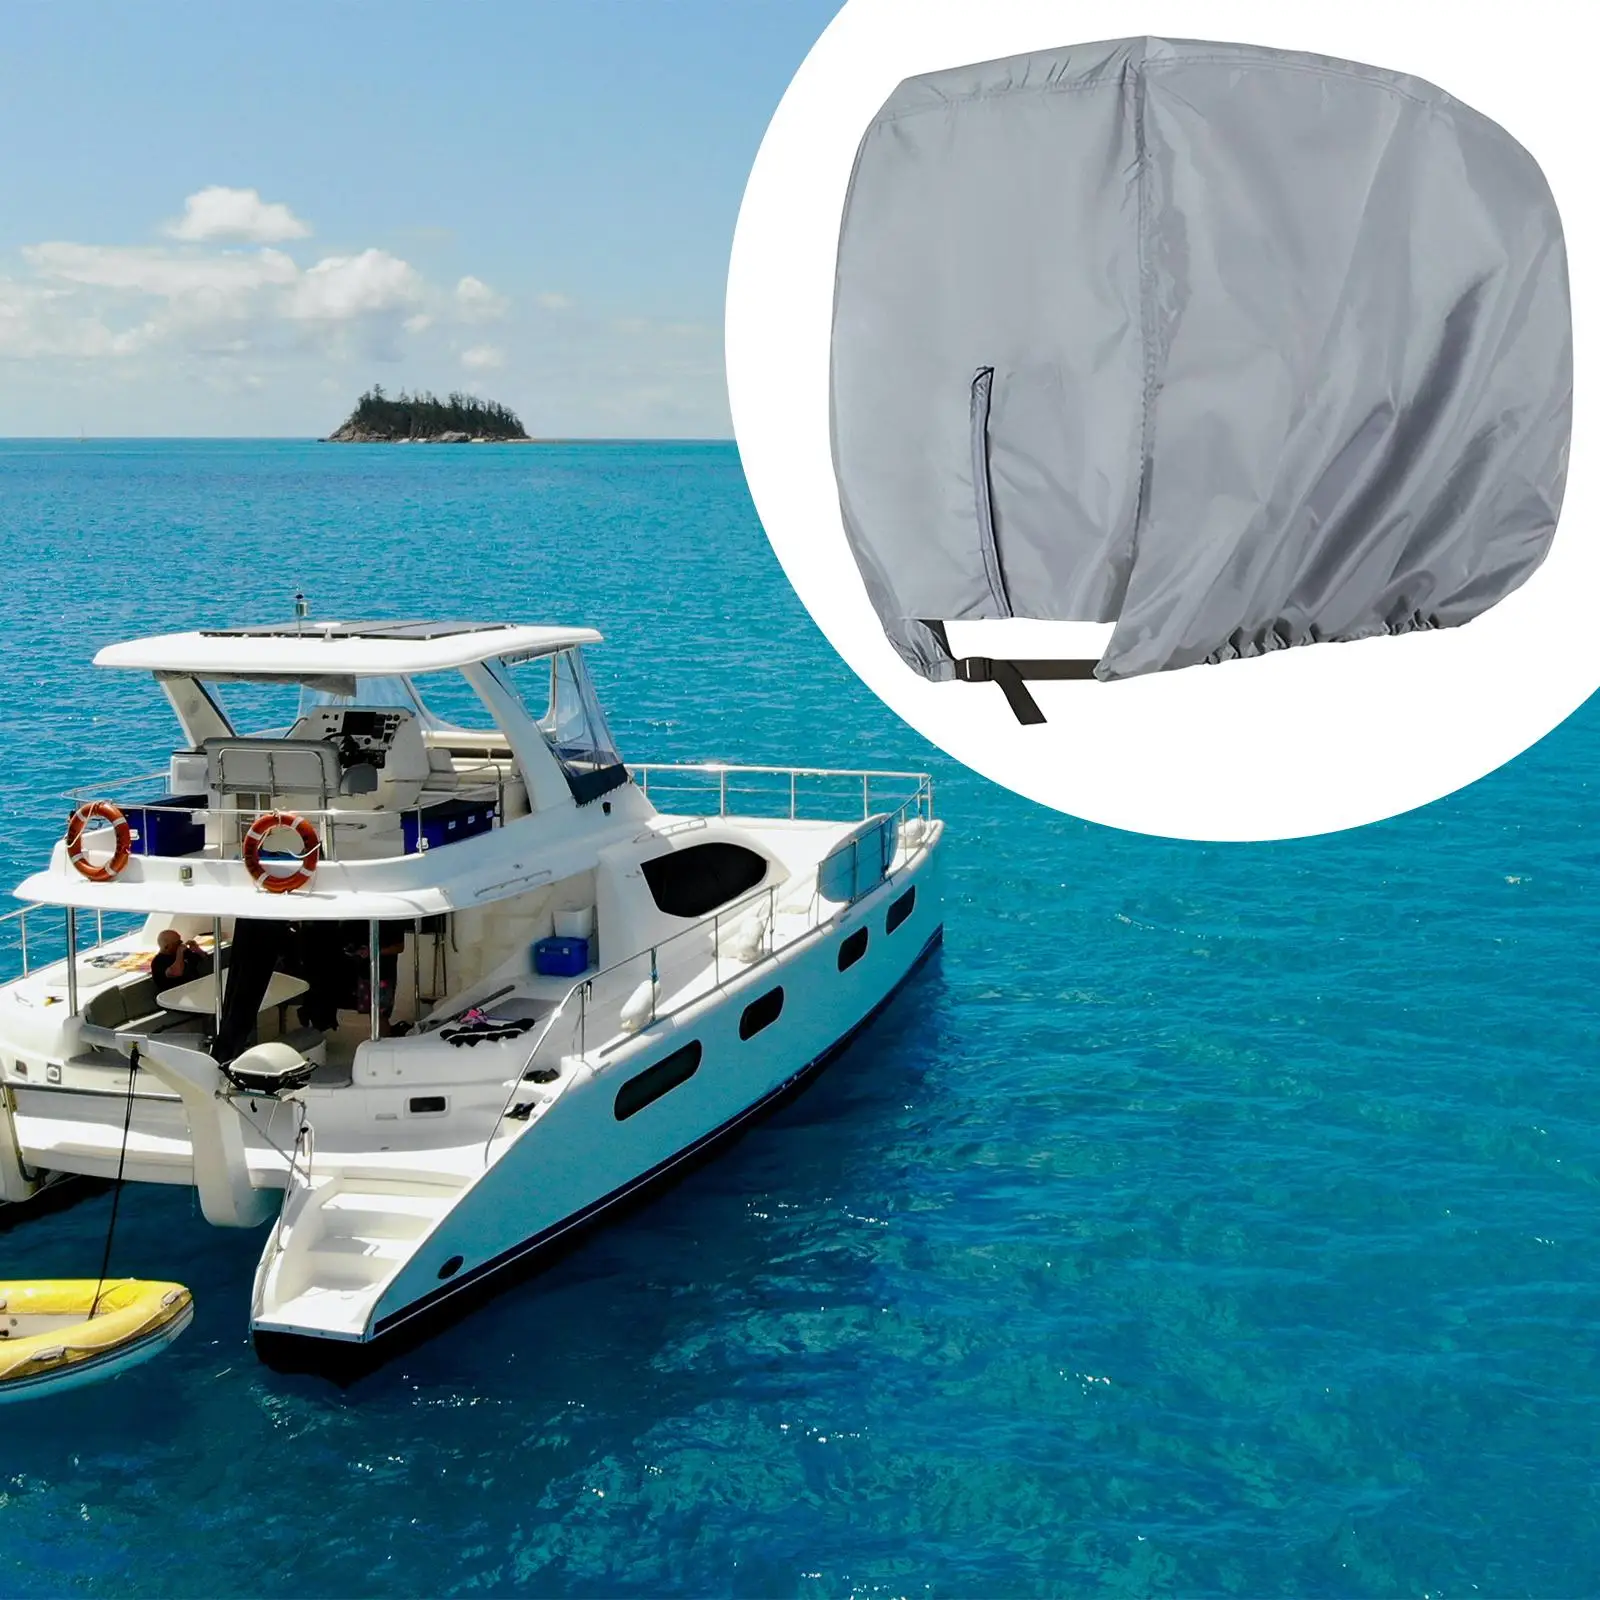 Outboard Motor Cover, Heavy Duty Motor Hood Cover, Boat Engine Hood Covers for Motor 115-225HP Protects from rain, snow, ,